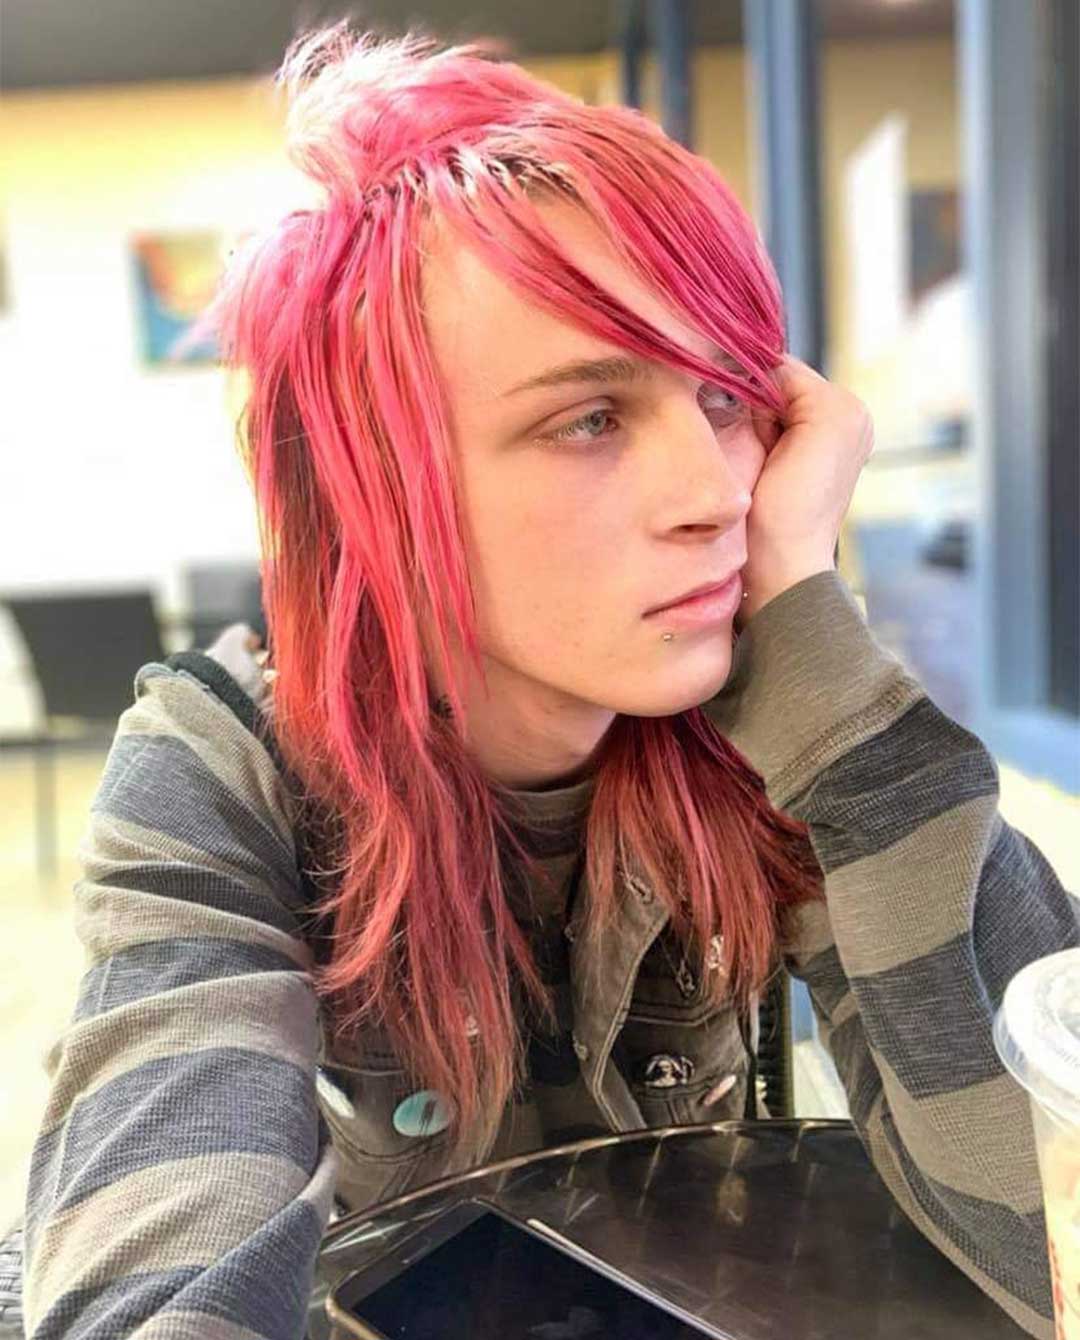 Long and Pinky Emo Hairstyle